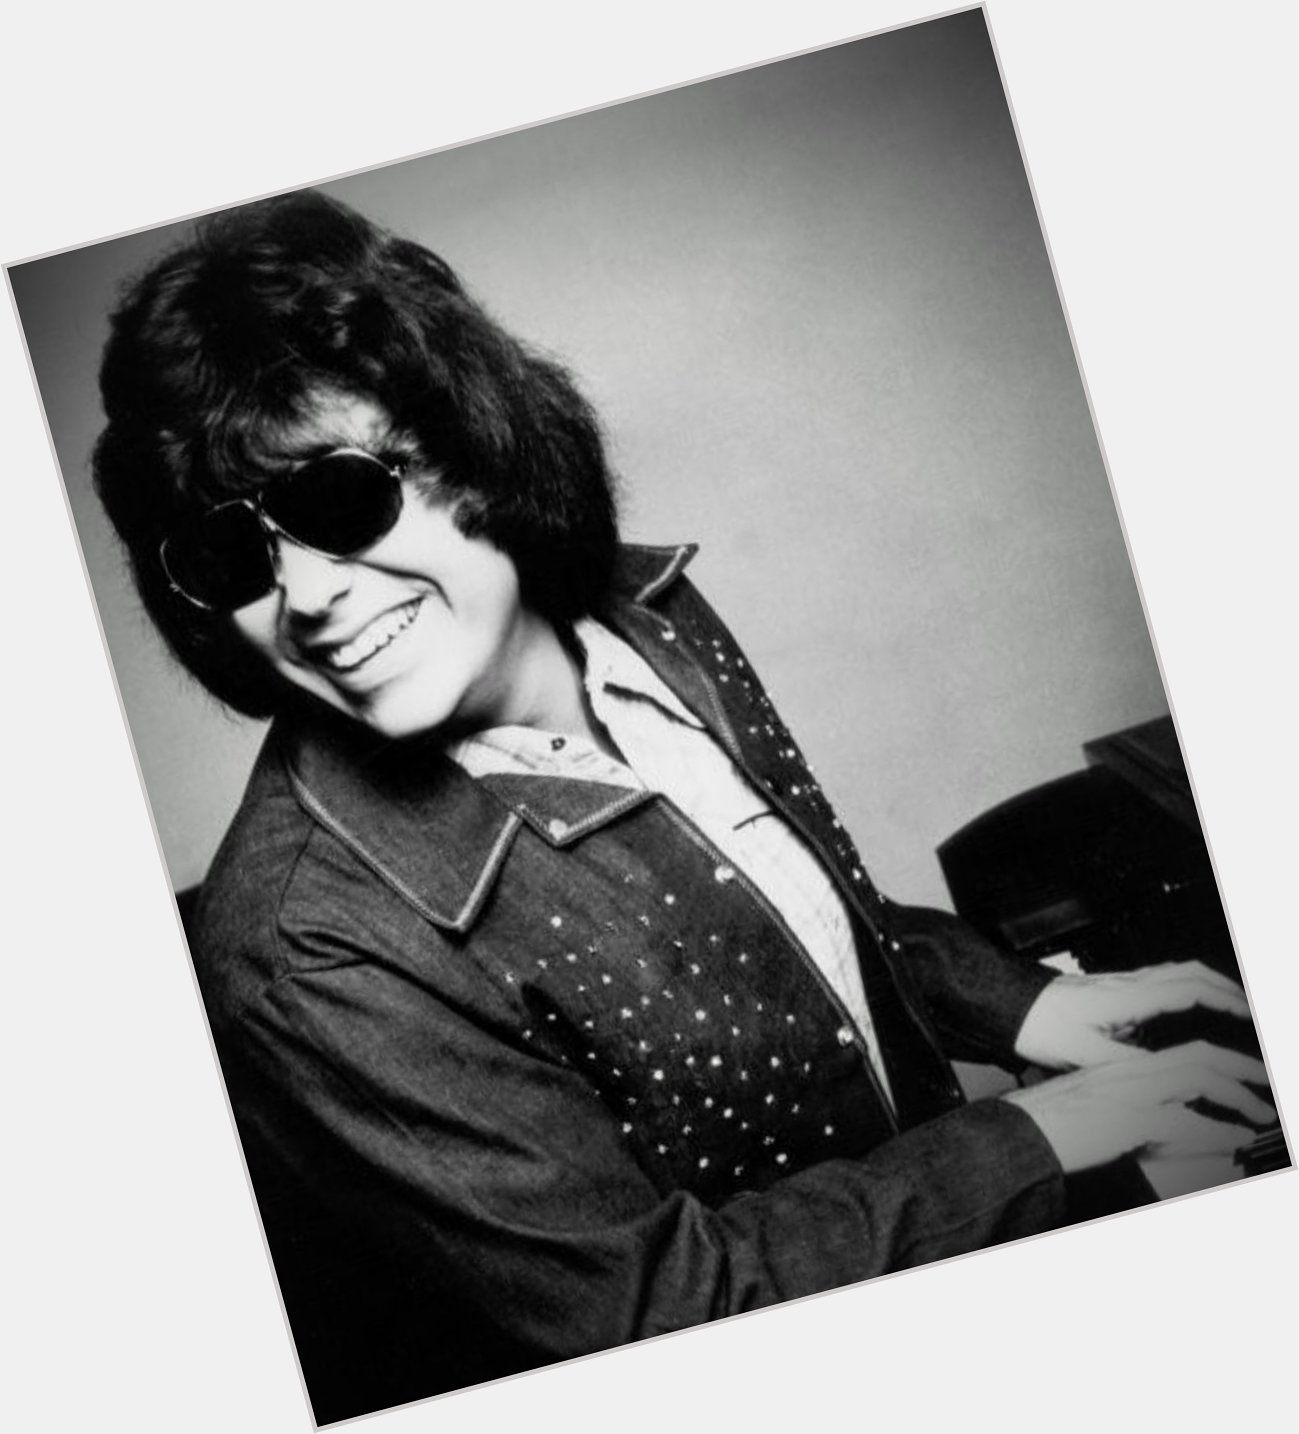  Happy Birthday Ronnie Milsap...
*Born on this day in 1943* 